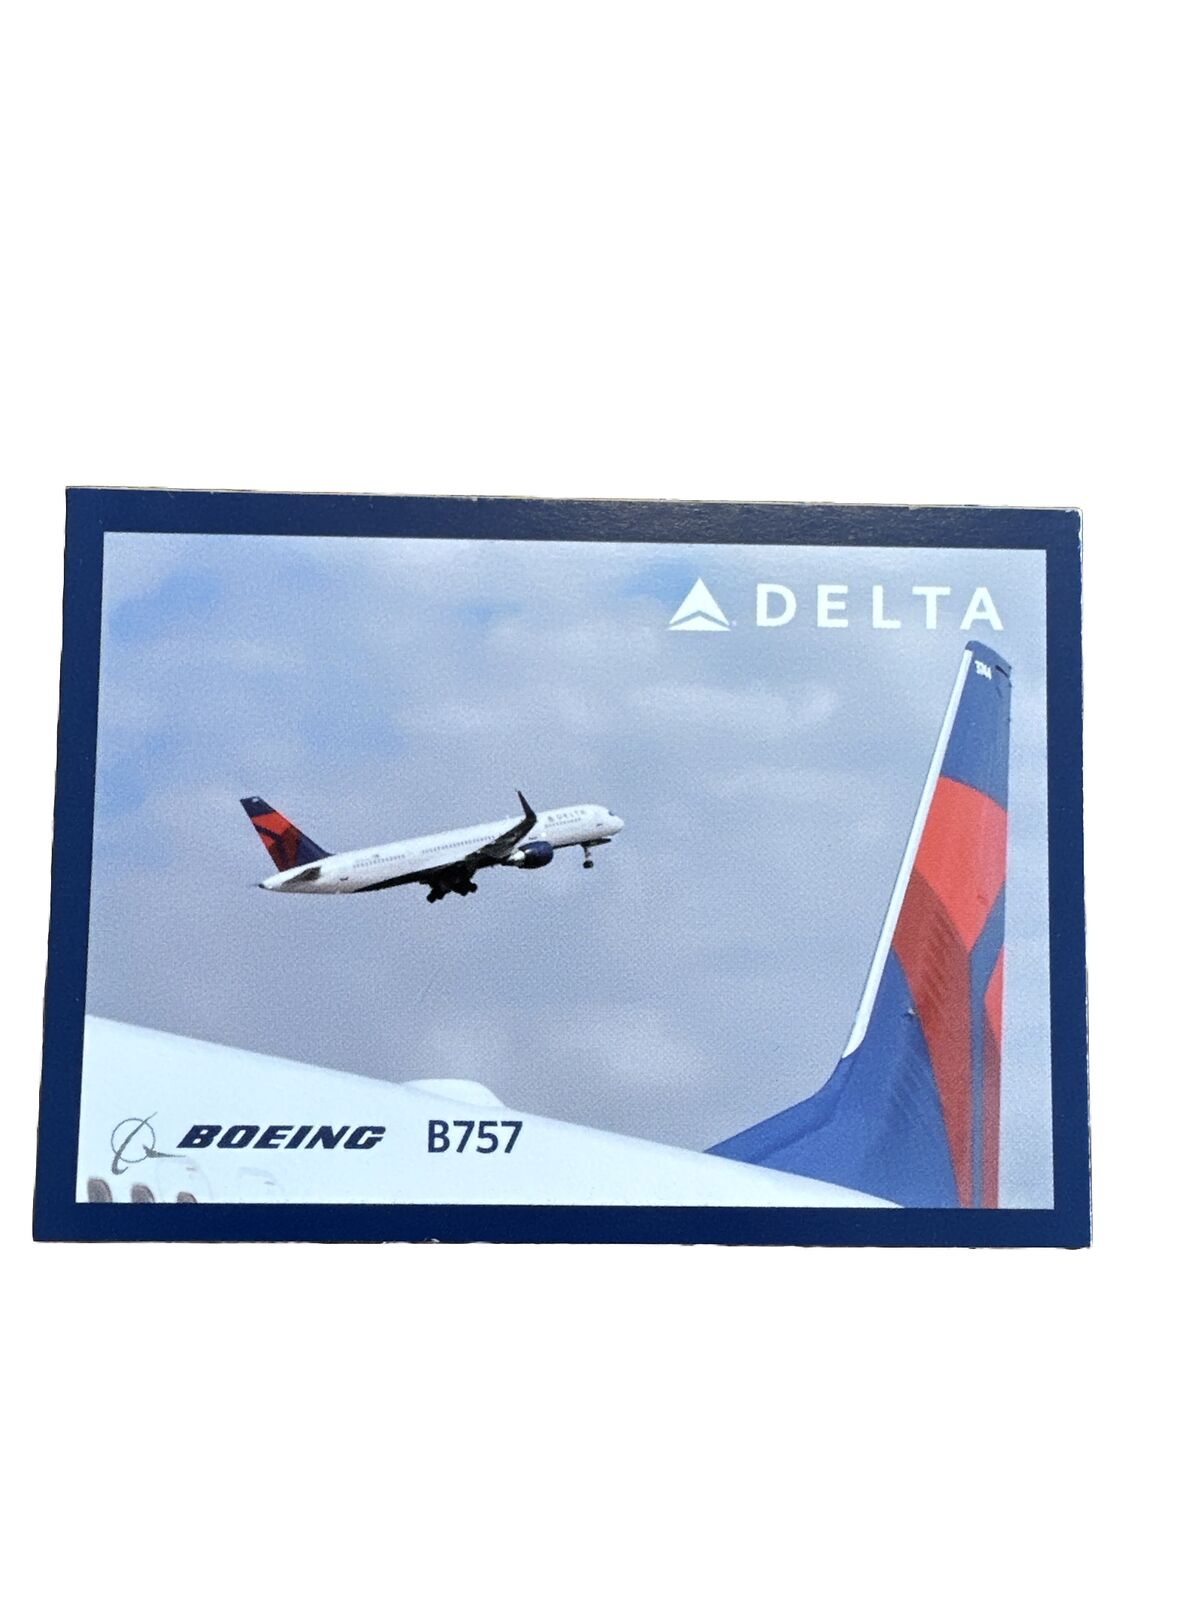 Delta Airline Aircraft Trading Card